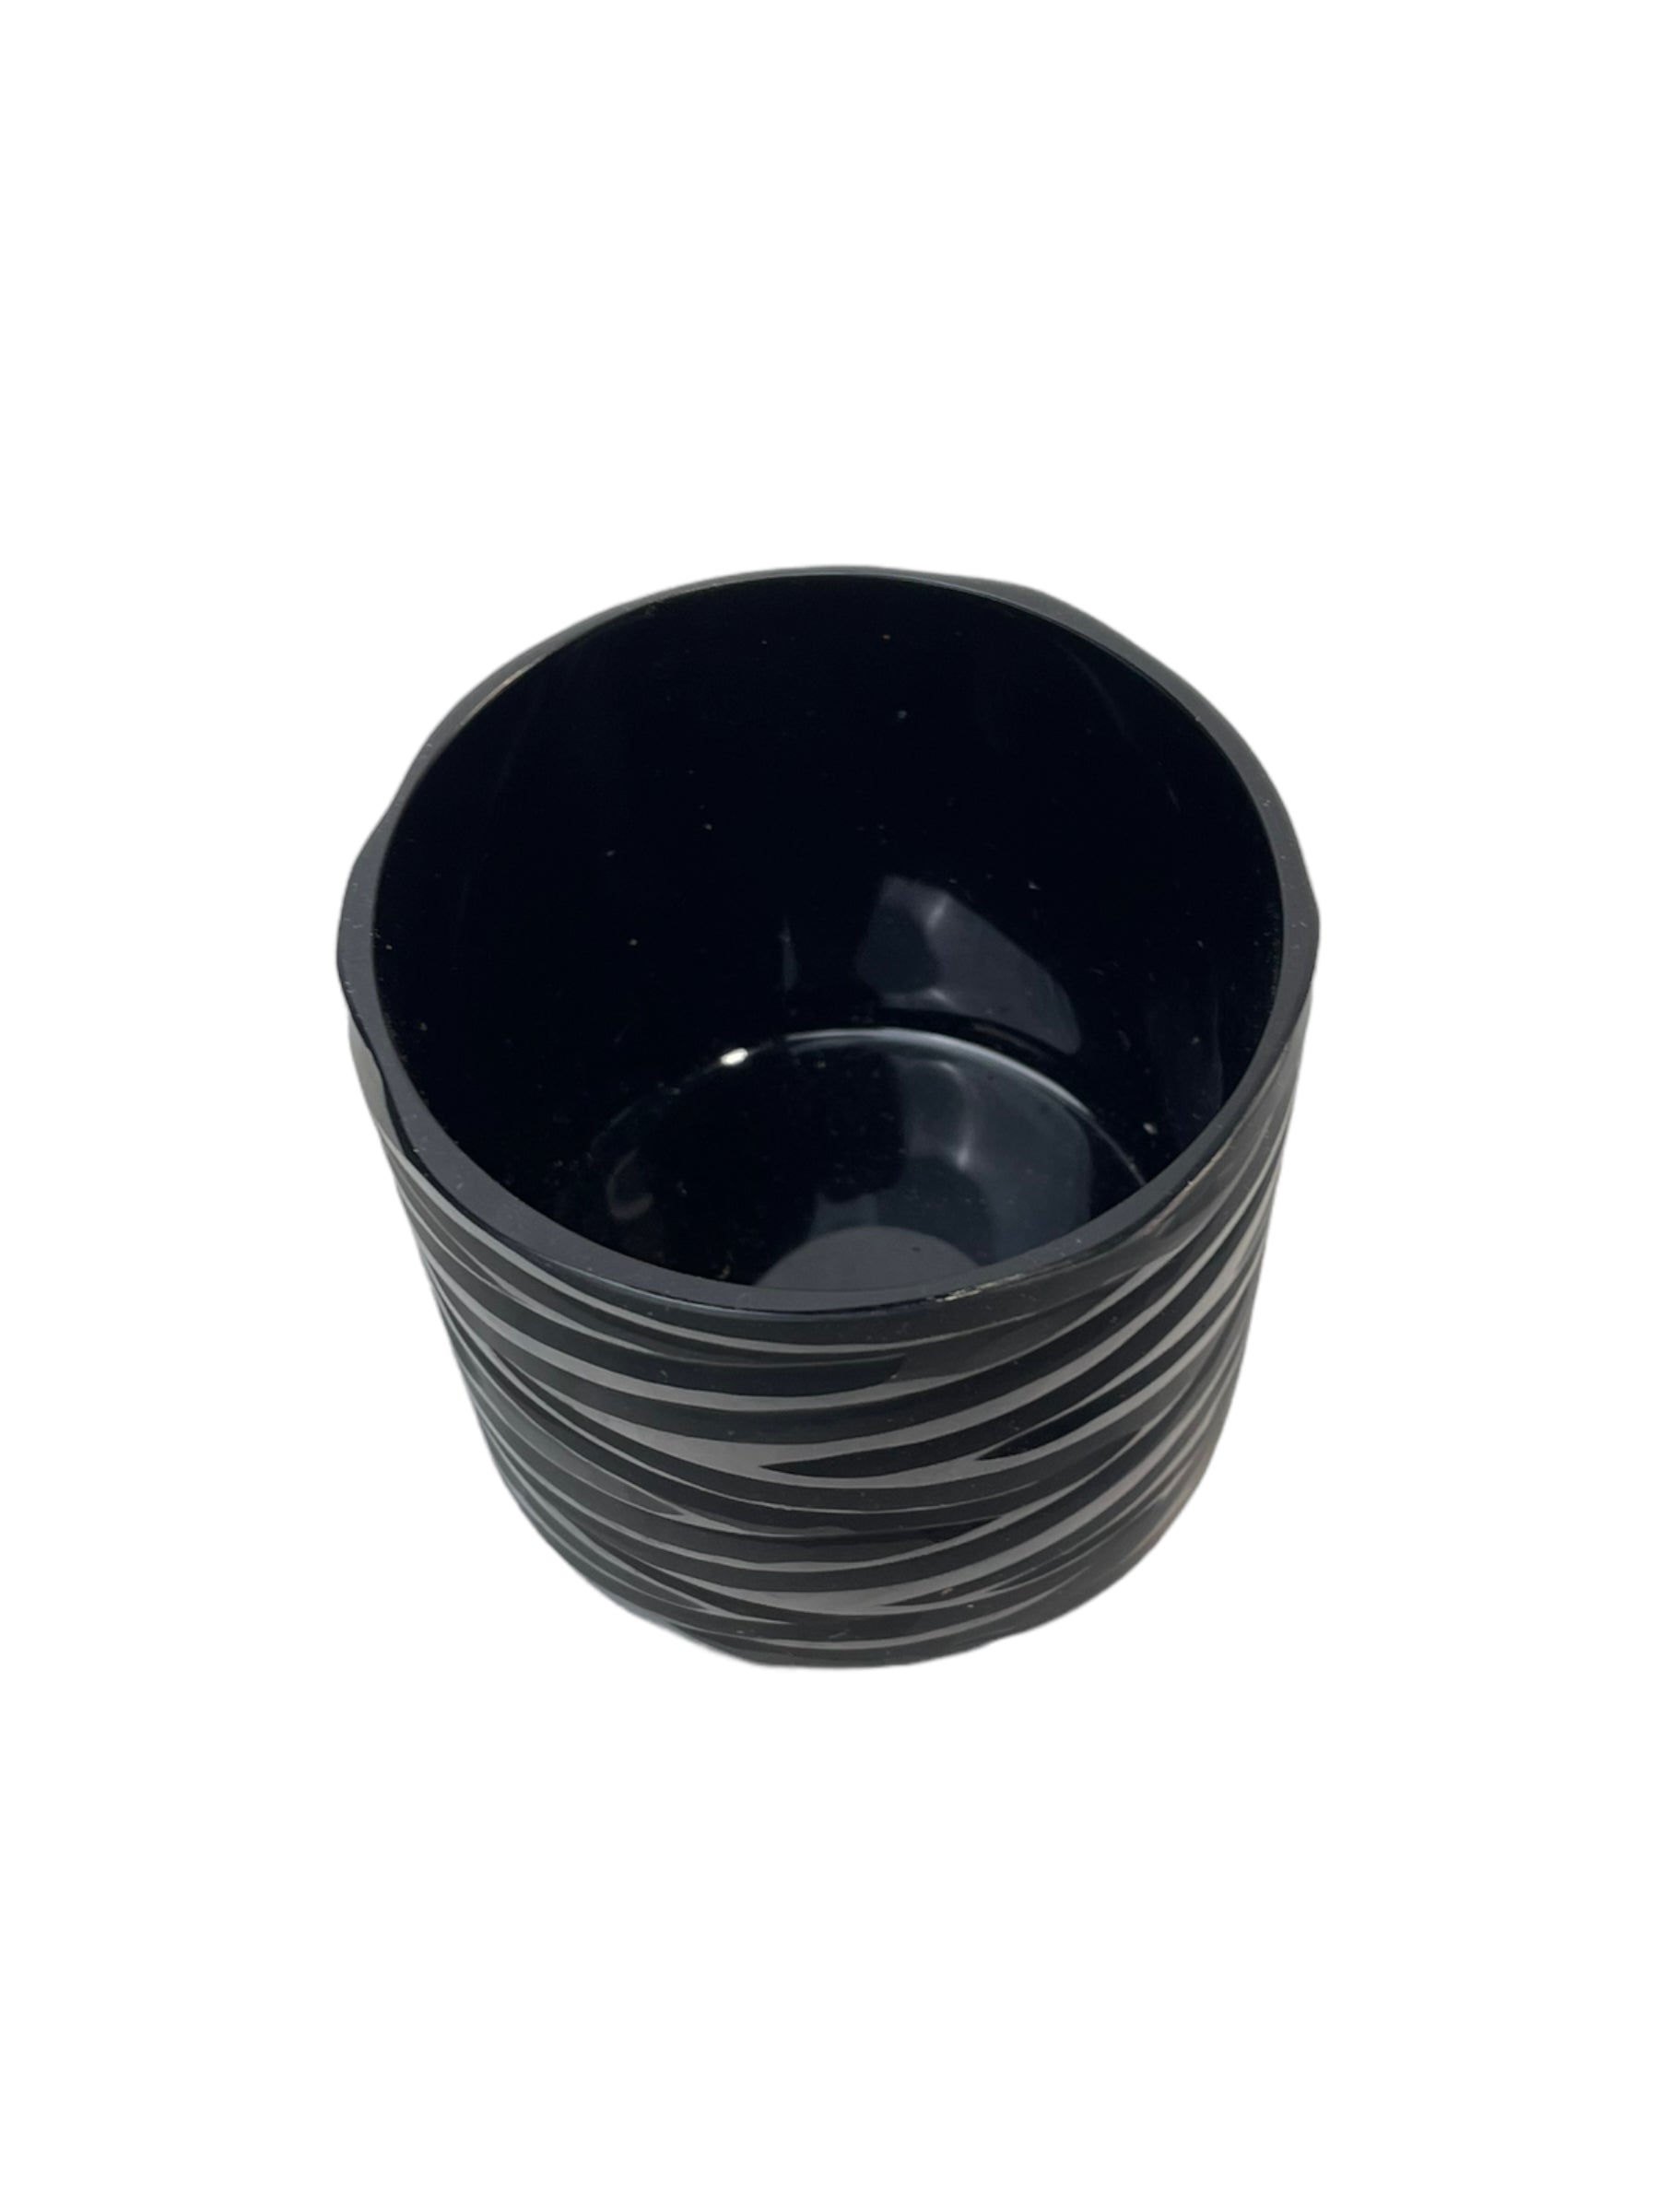 Small Black Ribbed Vase - 3 inches